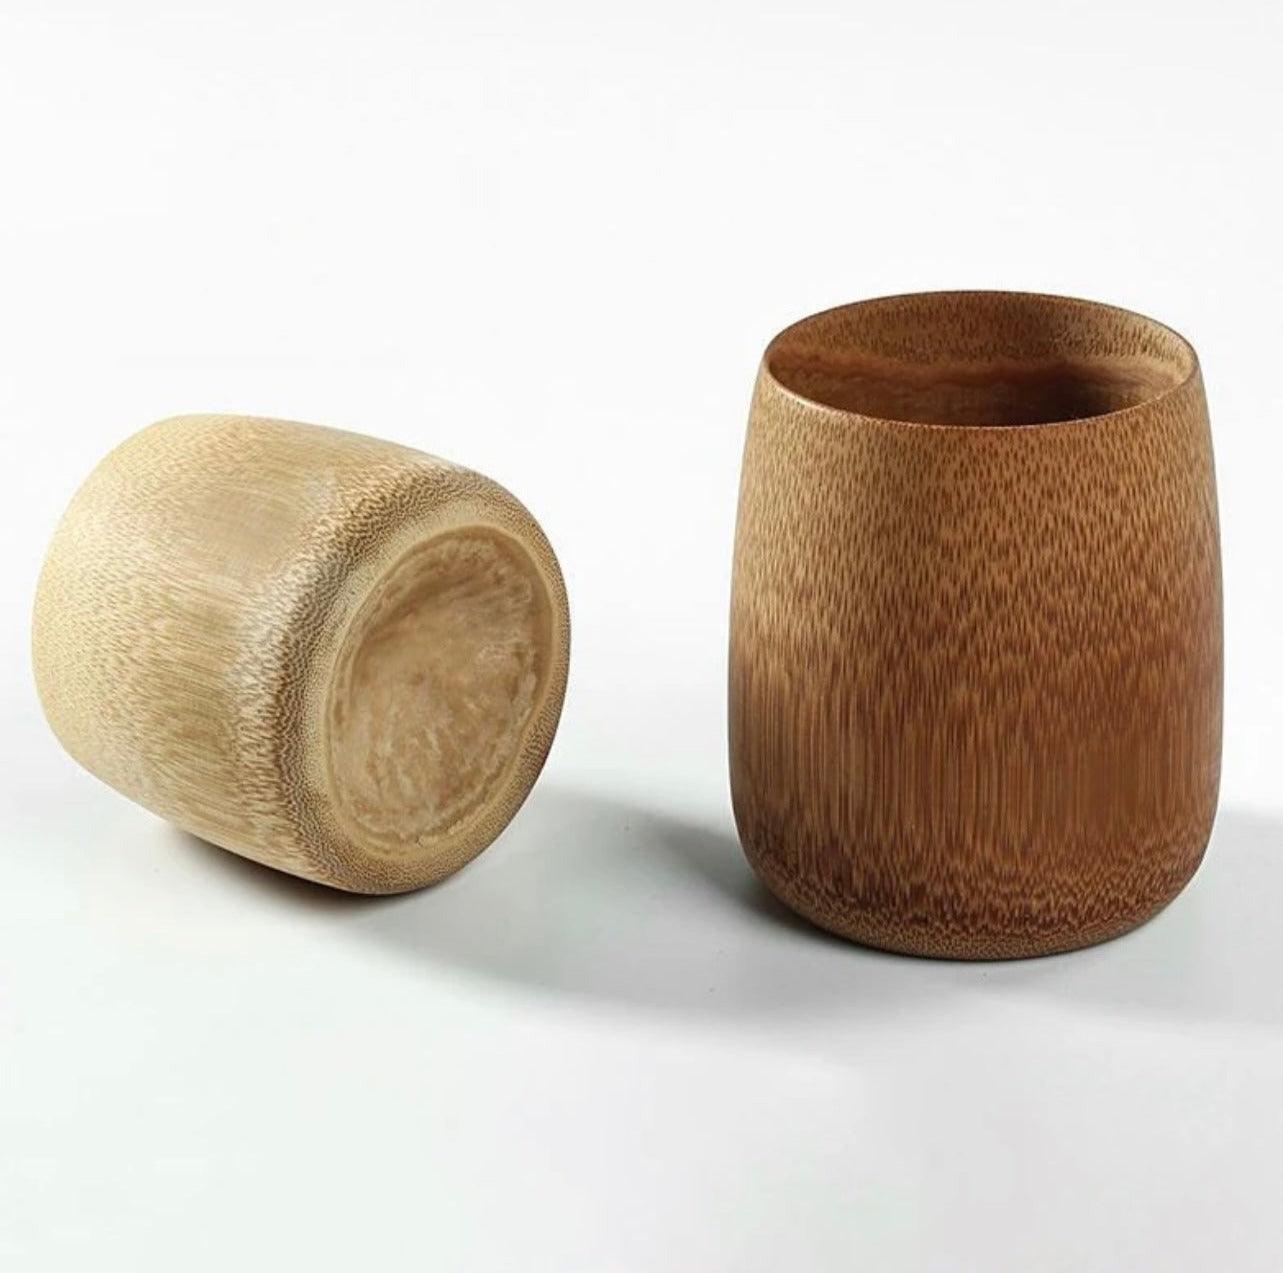 Bamboo Cups (4 Pack) - Expat Life Style